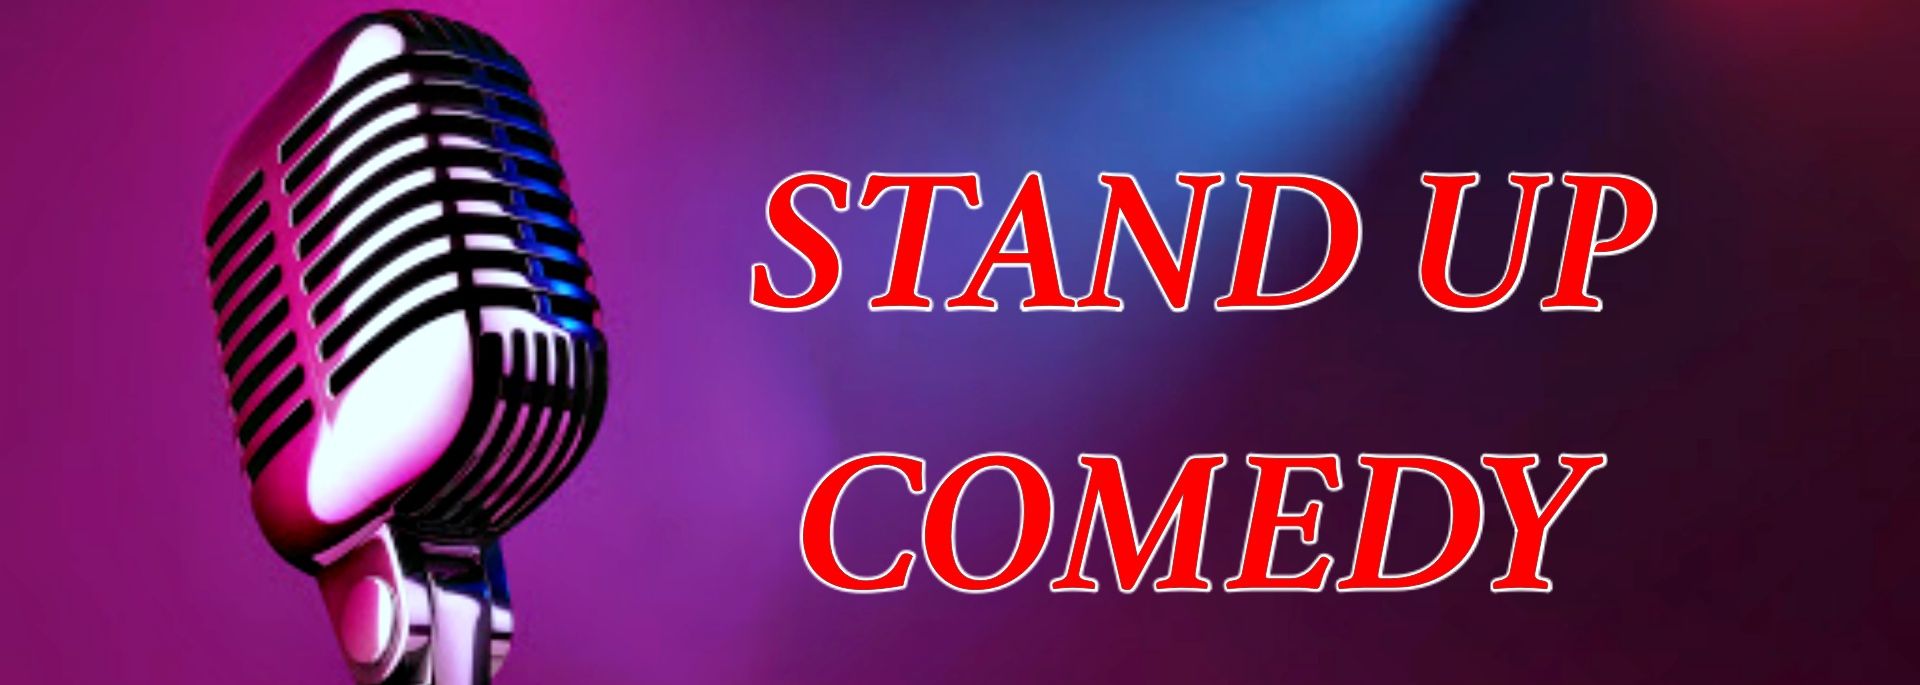 Stand-up Comedy category